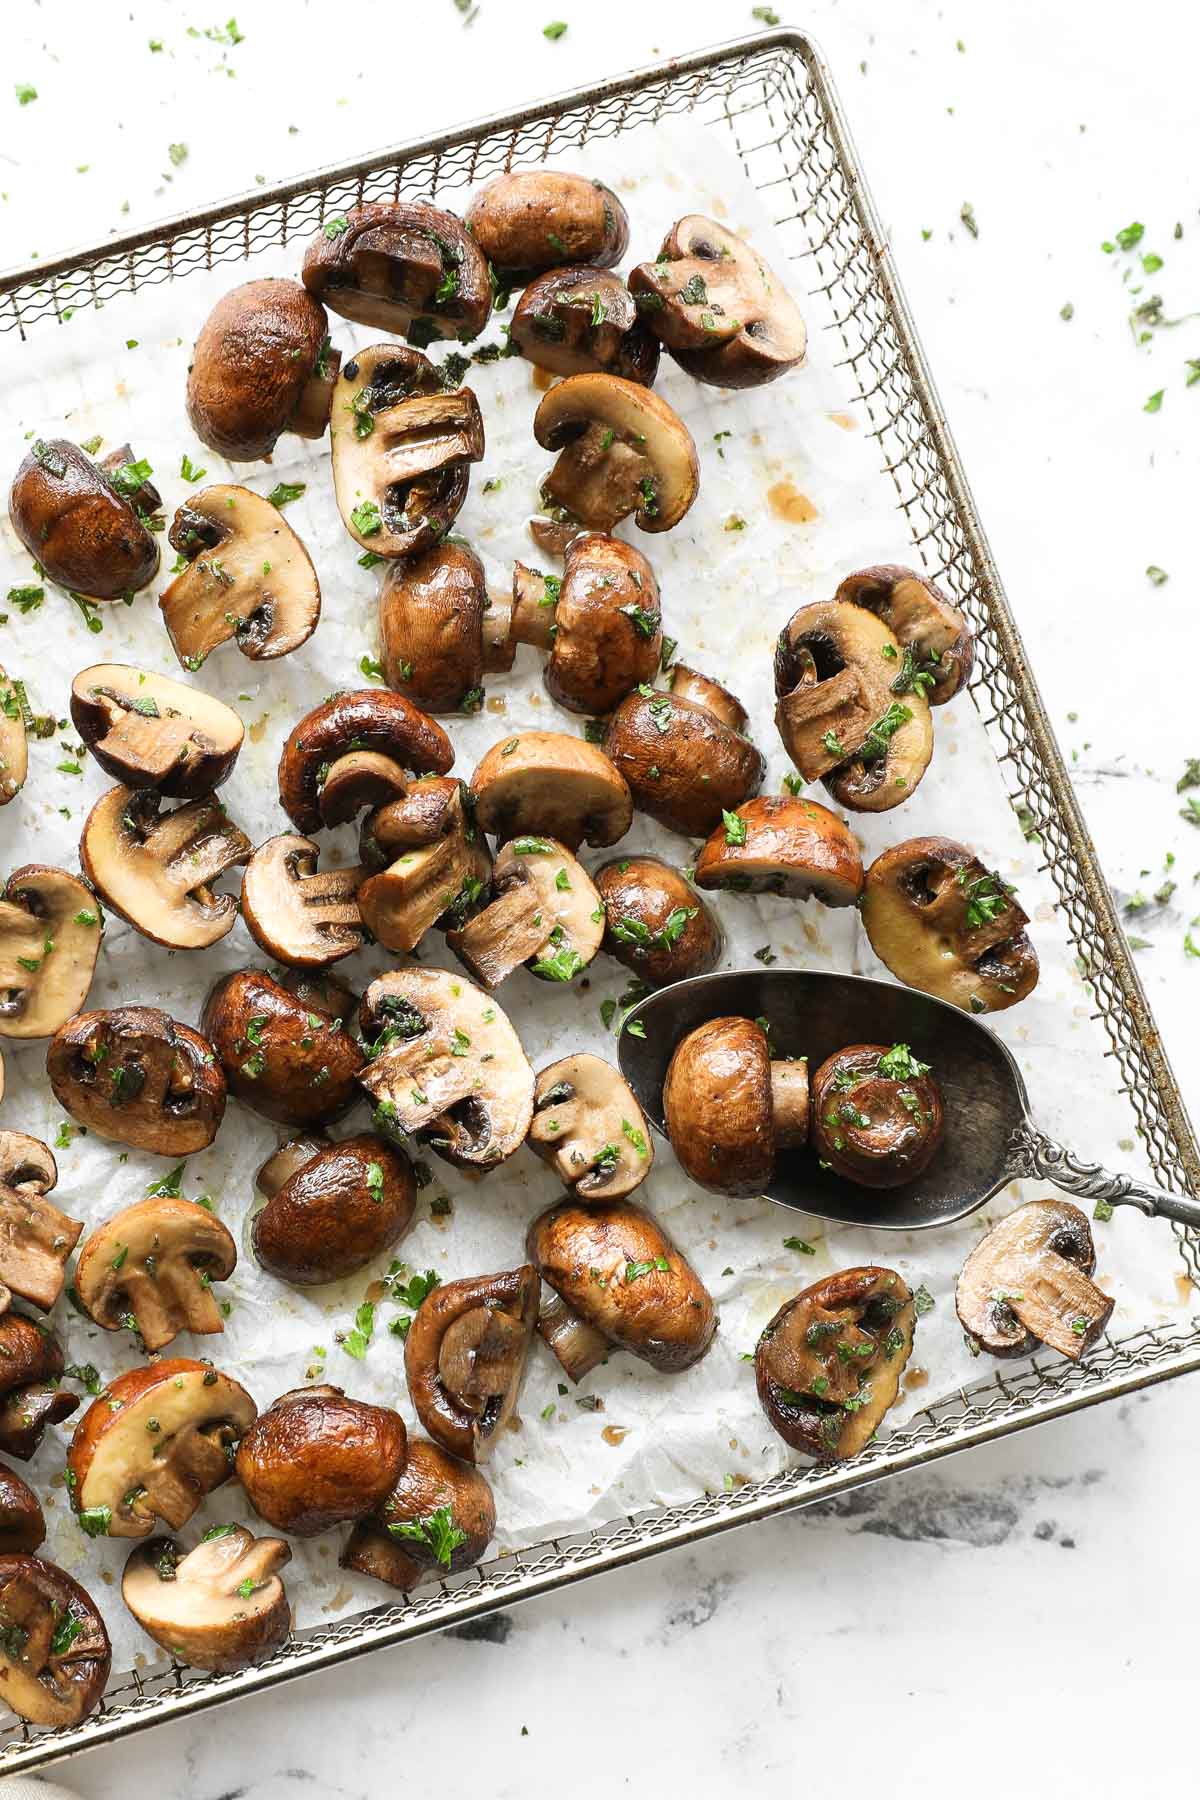 Vertical overhead image of mushrooms in air fryer basket with a serving spoon.